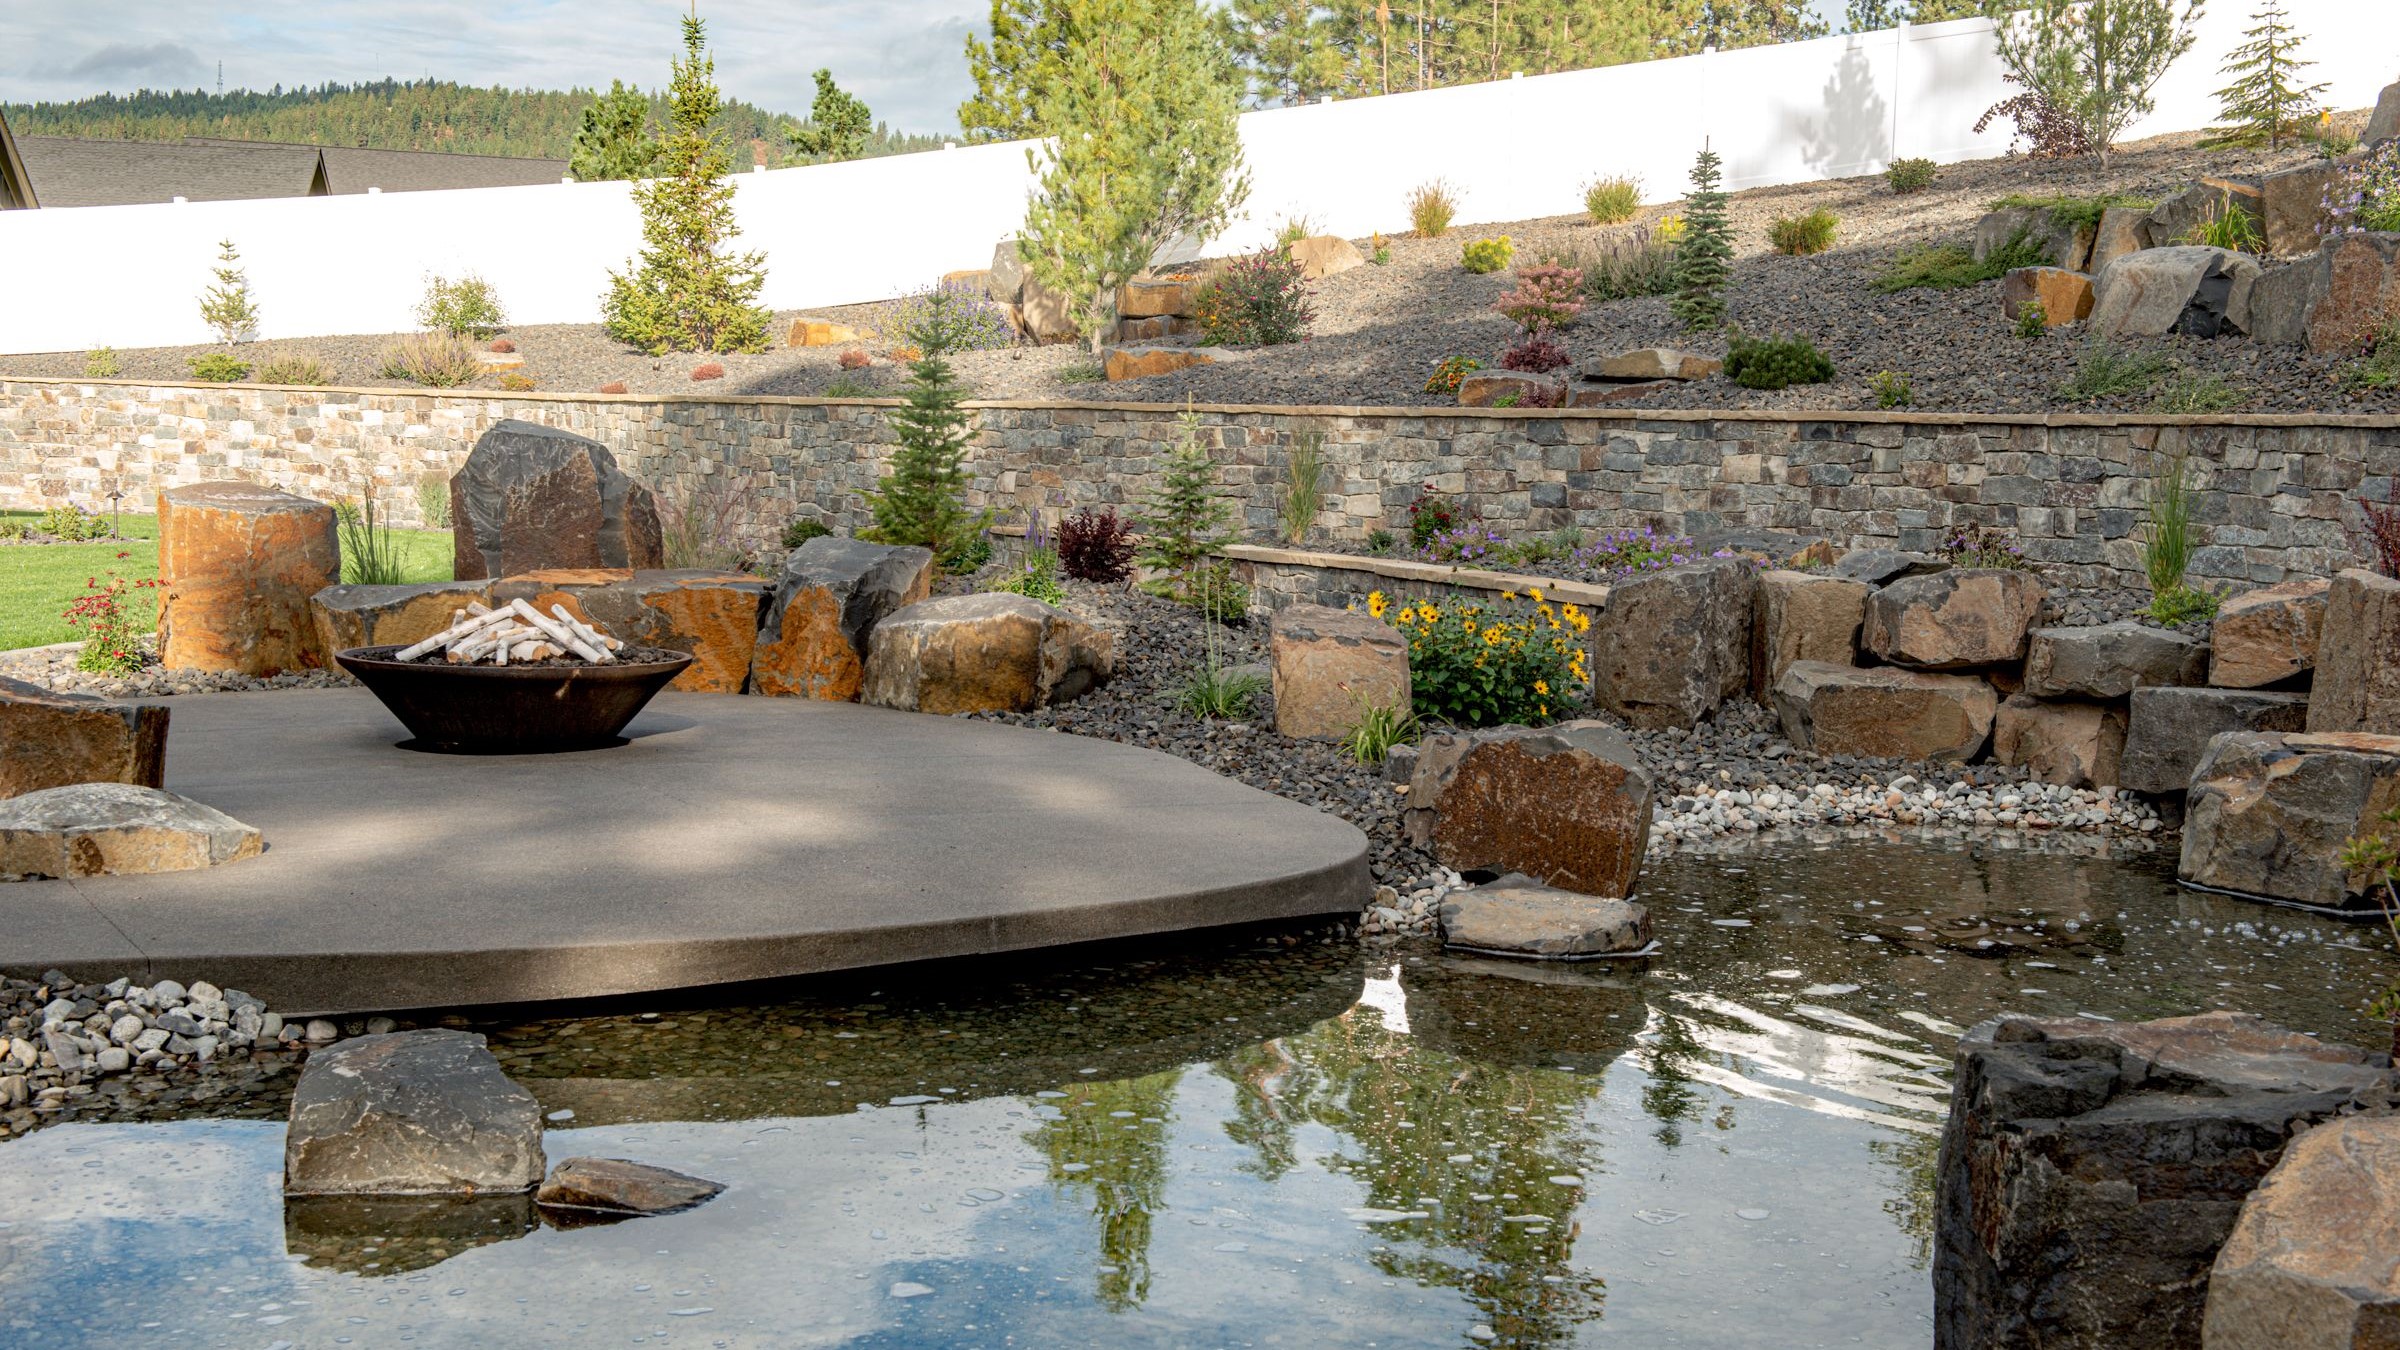 Modern circular patio surrounded by a water feature and natural stone retaining wall.